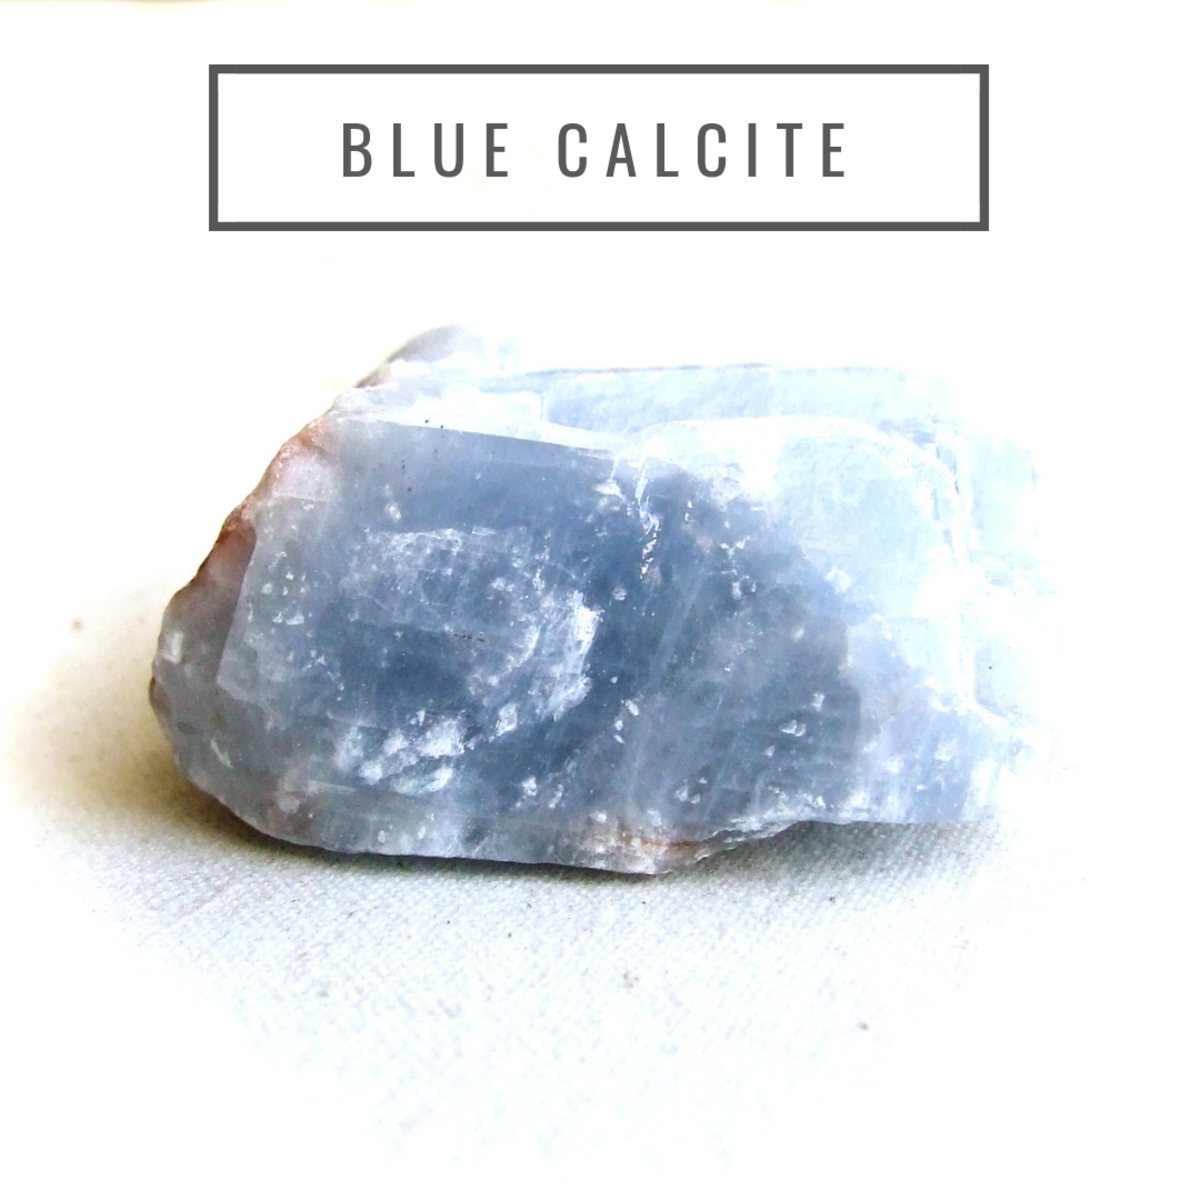 Blue calcite has an excellent soothing, calming energy. 